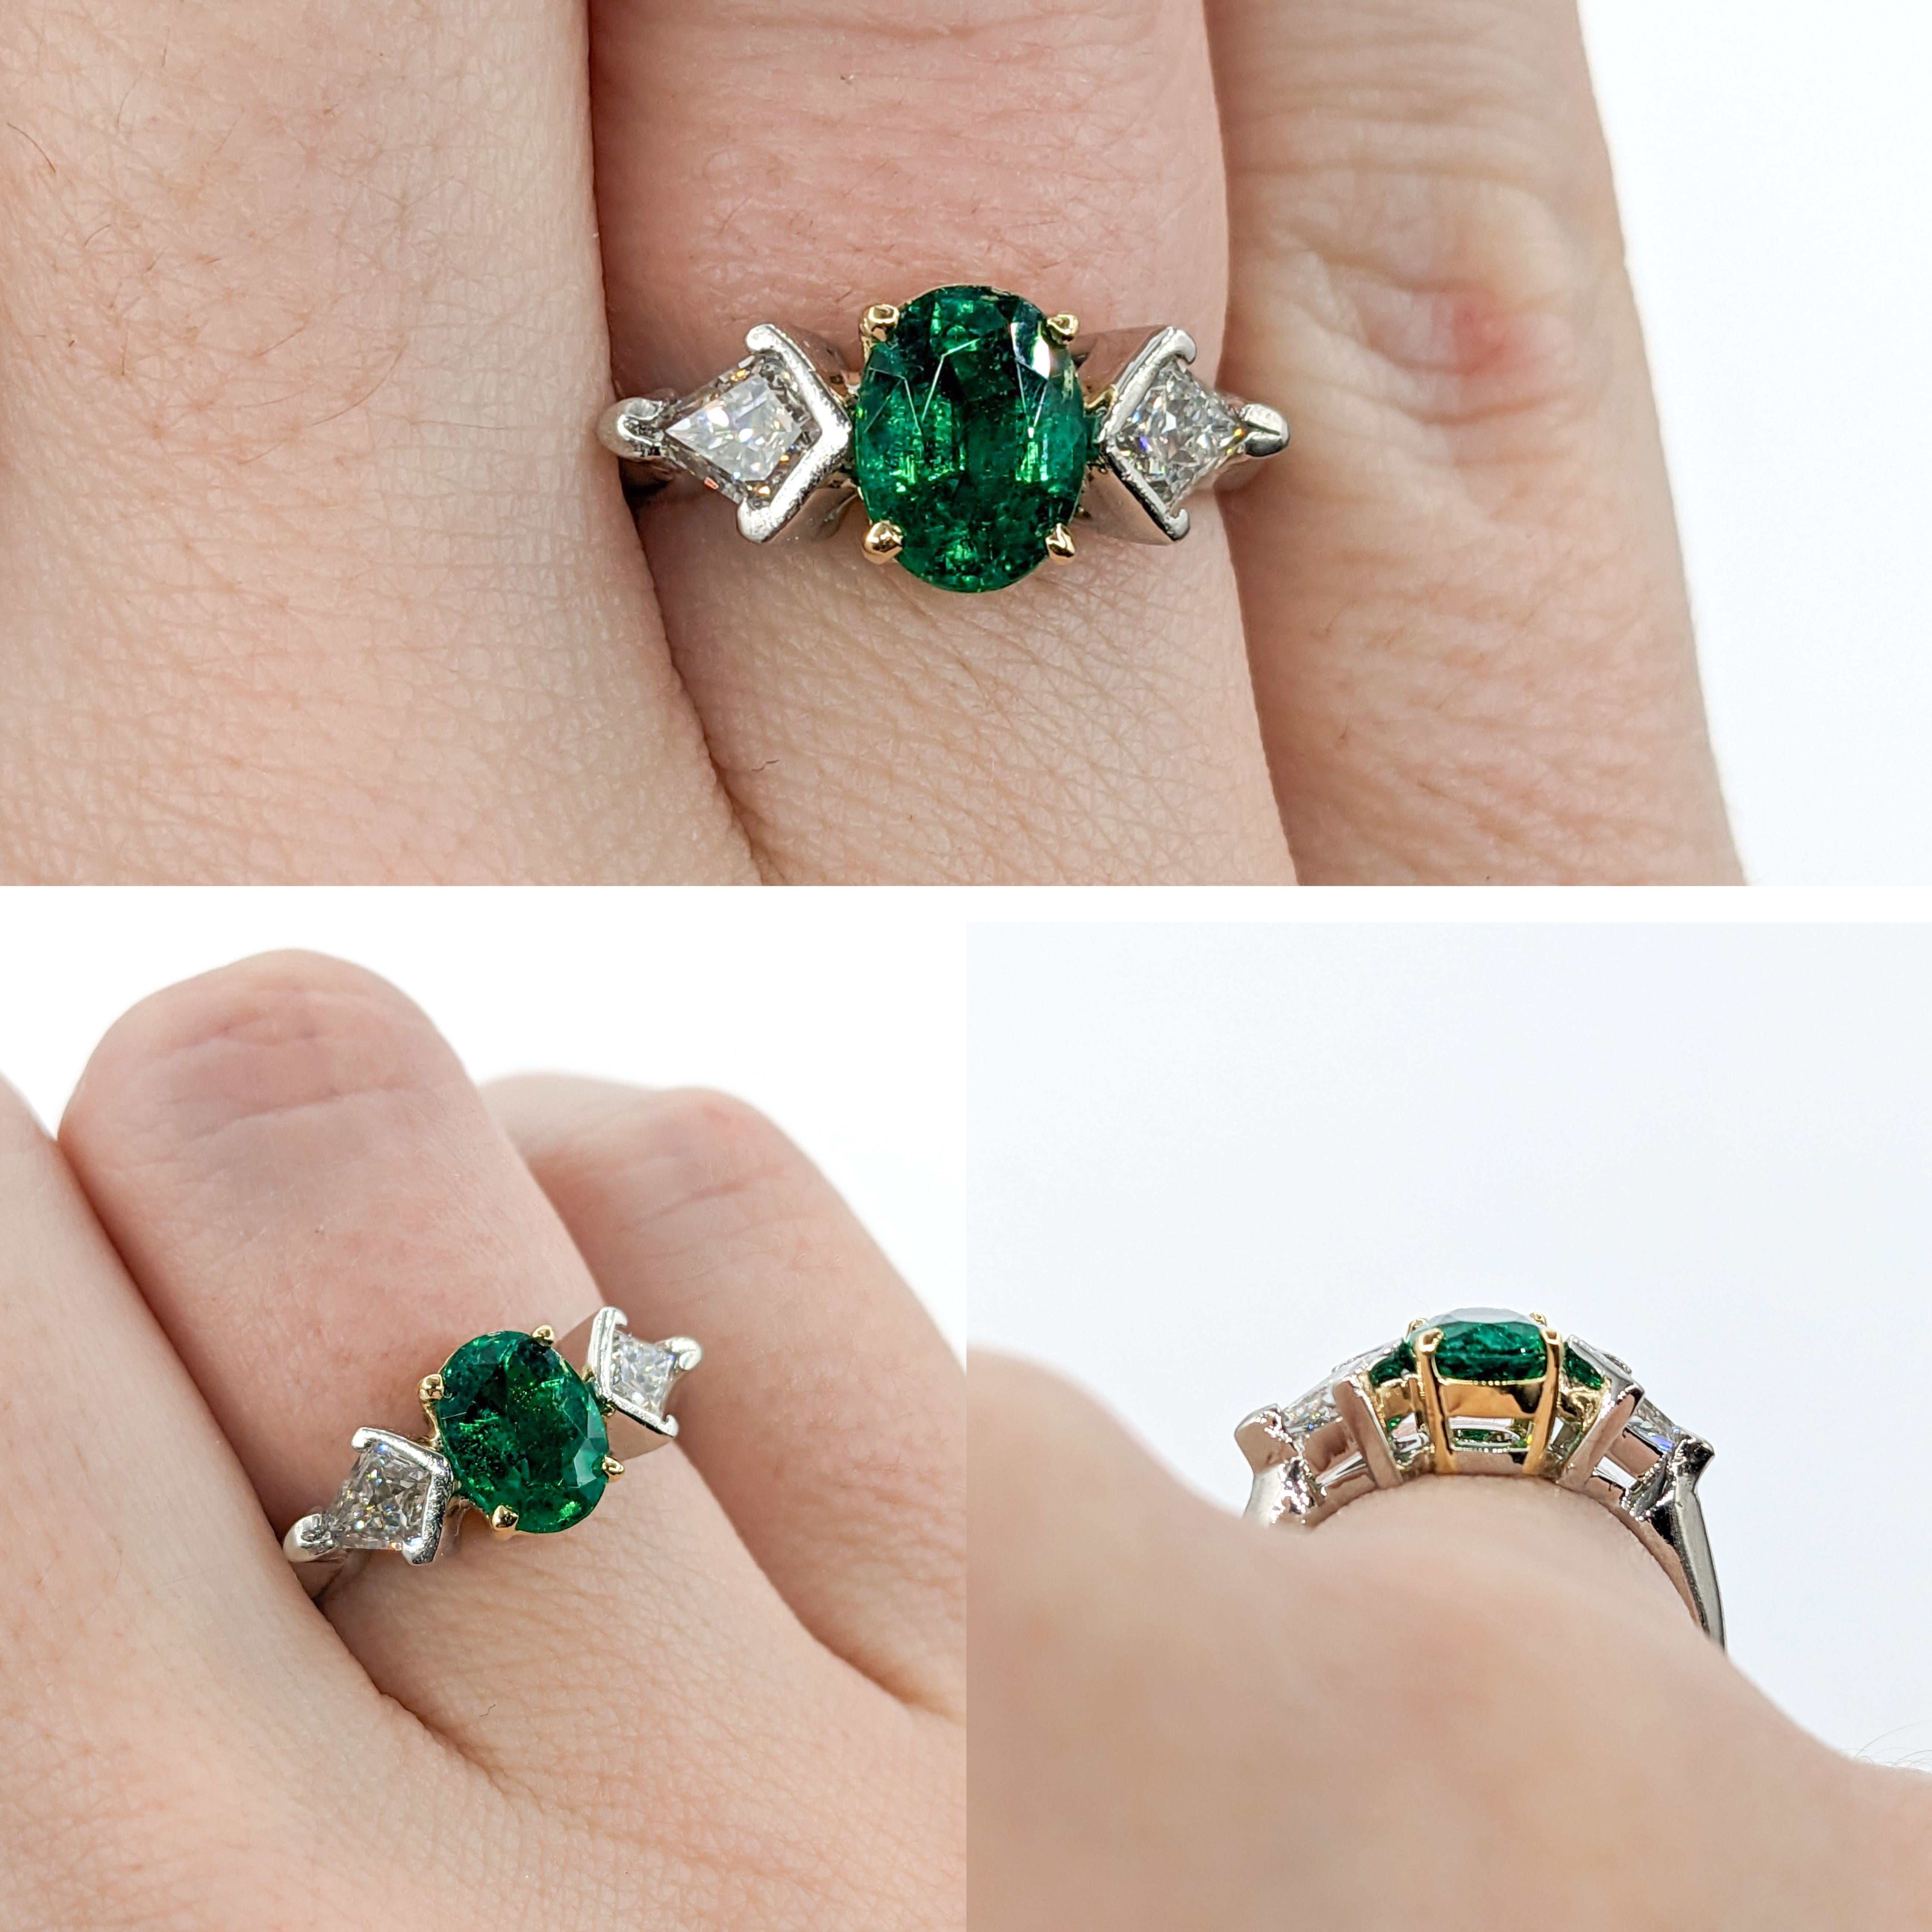 Emerald & Kite Shape Diamond Ring In Platinum

Presenting a remarkable Two Tone Ring, elegantly fashioned in a blend of 18kt yellow gold and platinum. It's adorned with .47ctw kite-shaped diamonds that shimmer with SI clarity and a near white